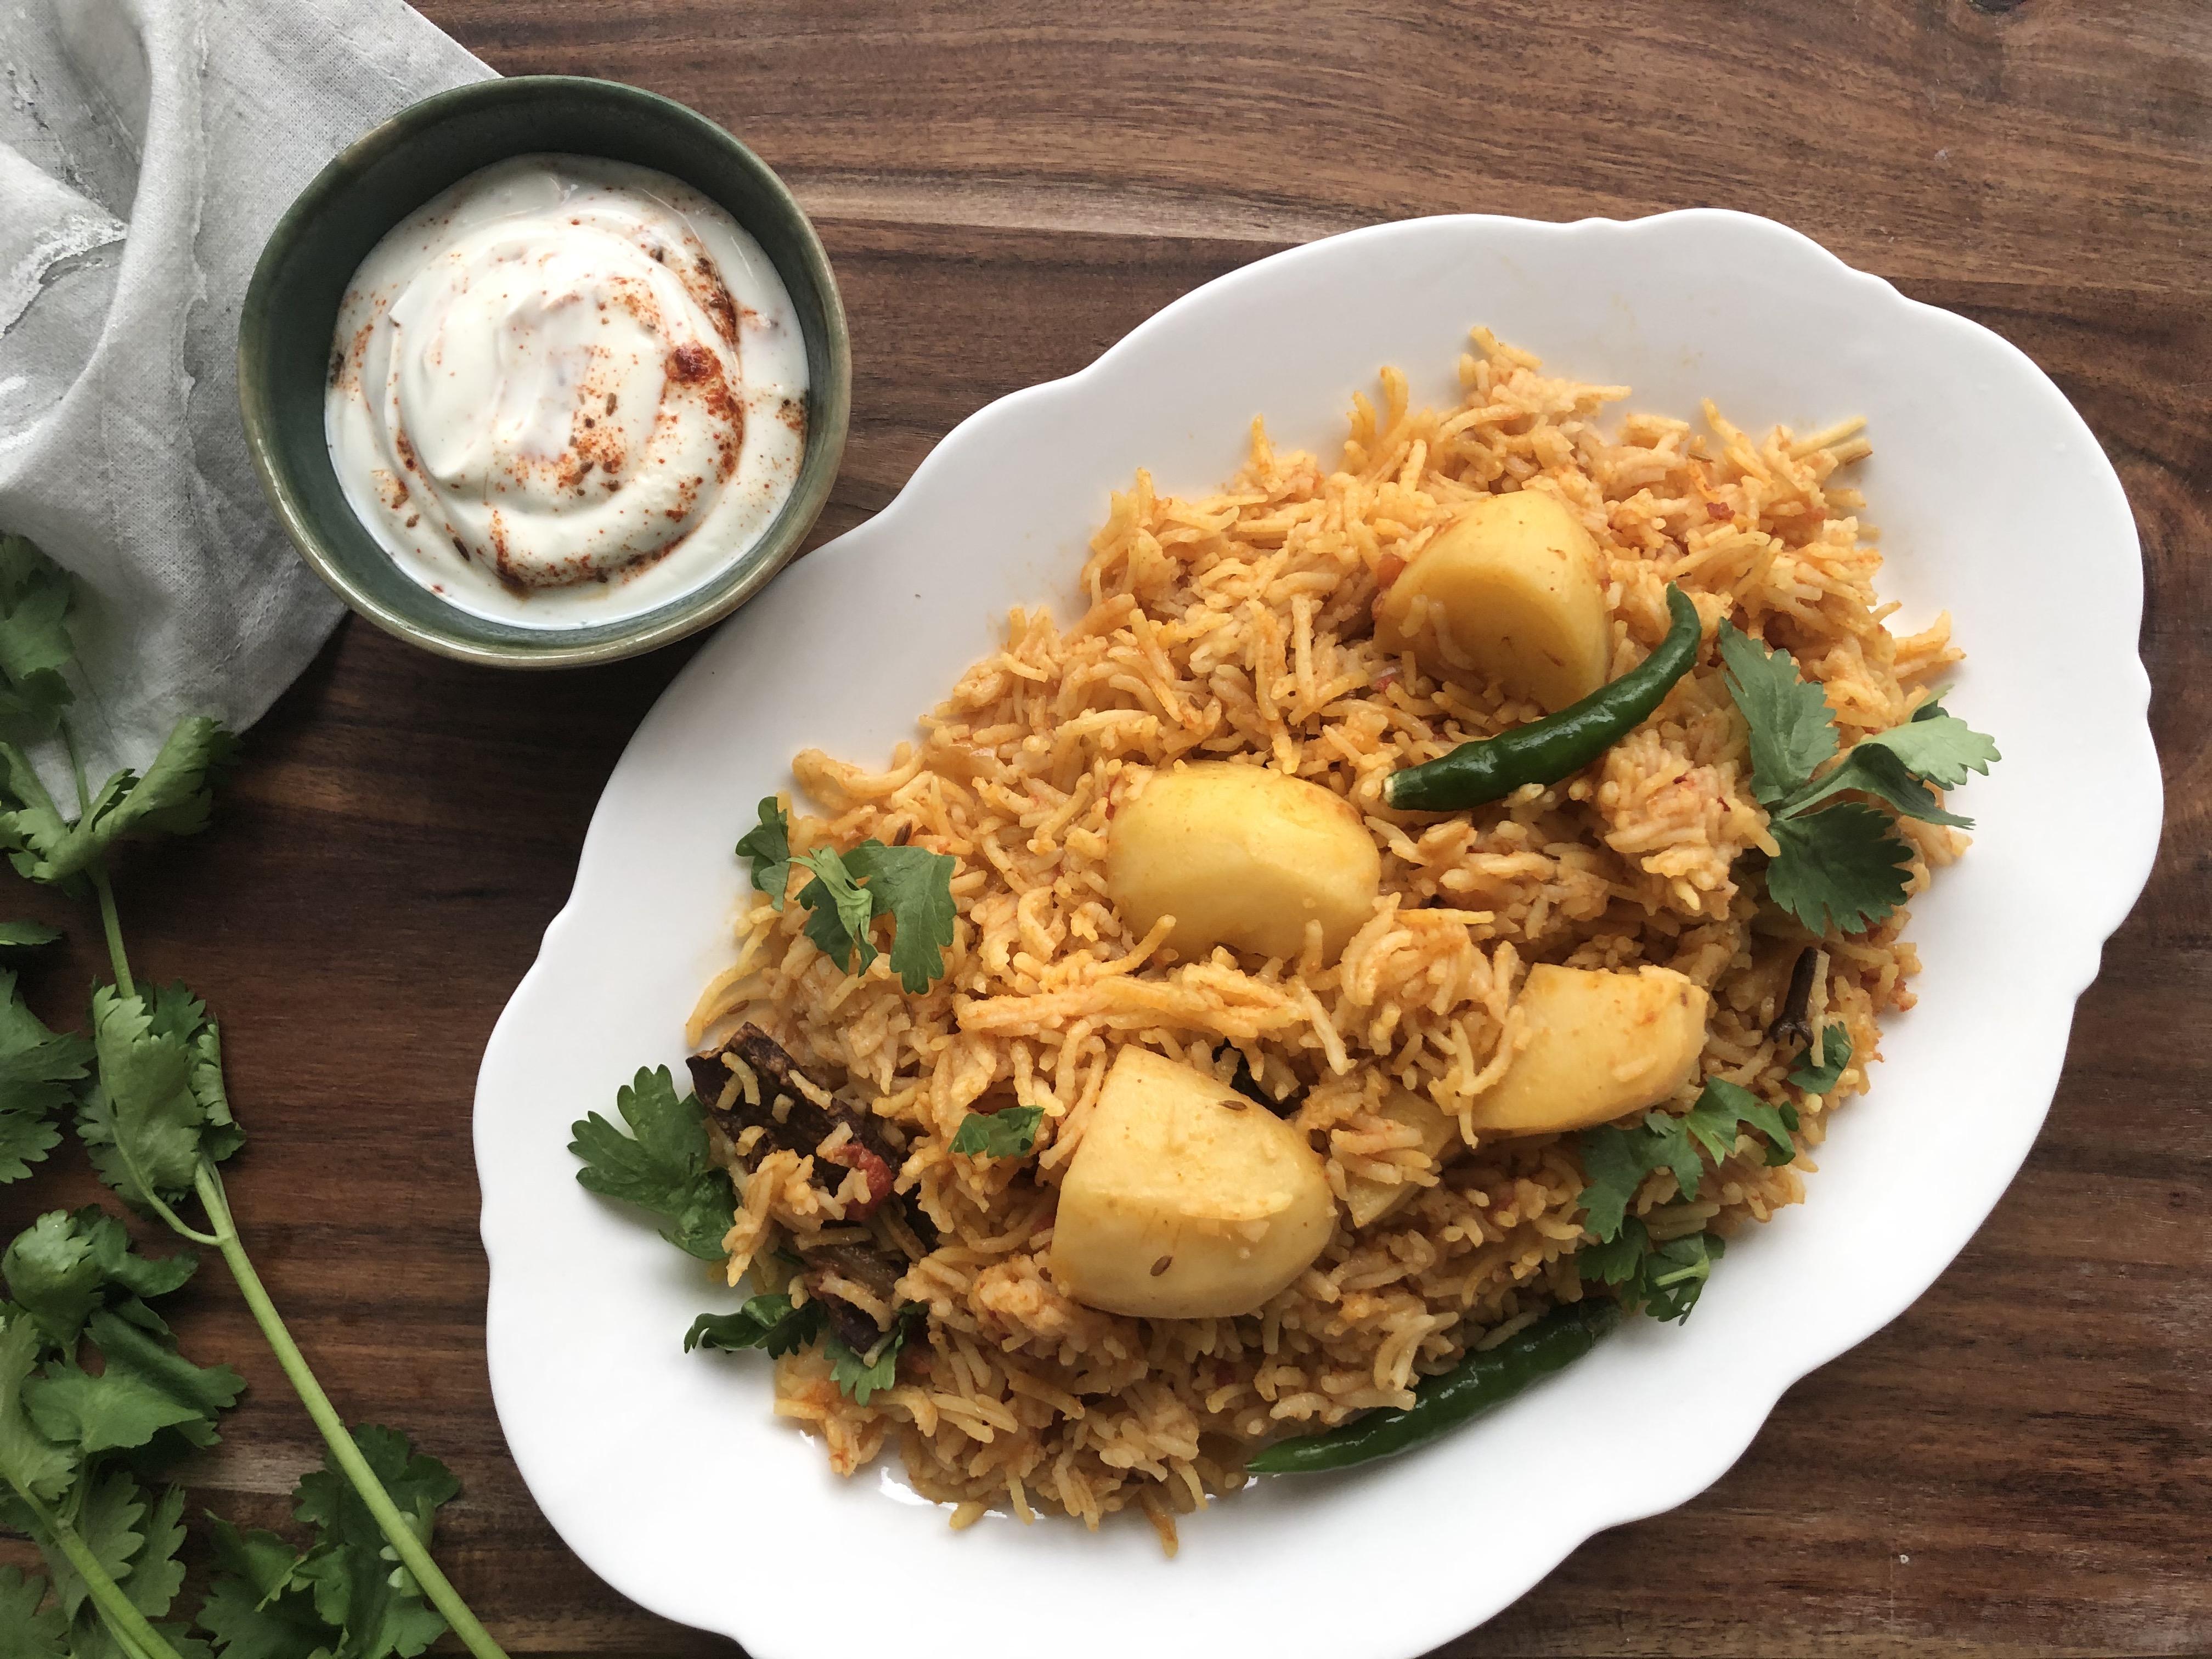 Similar to a pilaf, aloo ki tahari or spiced potato rice is a Pakistani / Indian vegetarian dish made with rice and potatoes. Other vegetables can be used but the most popular are potatoes. 